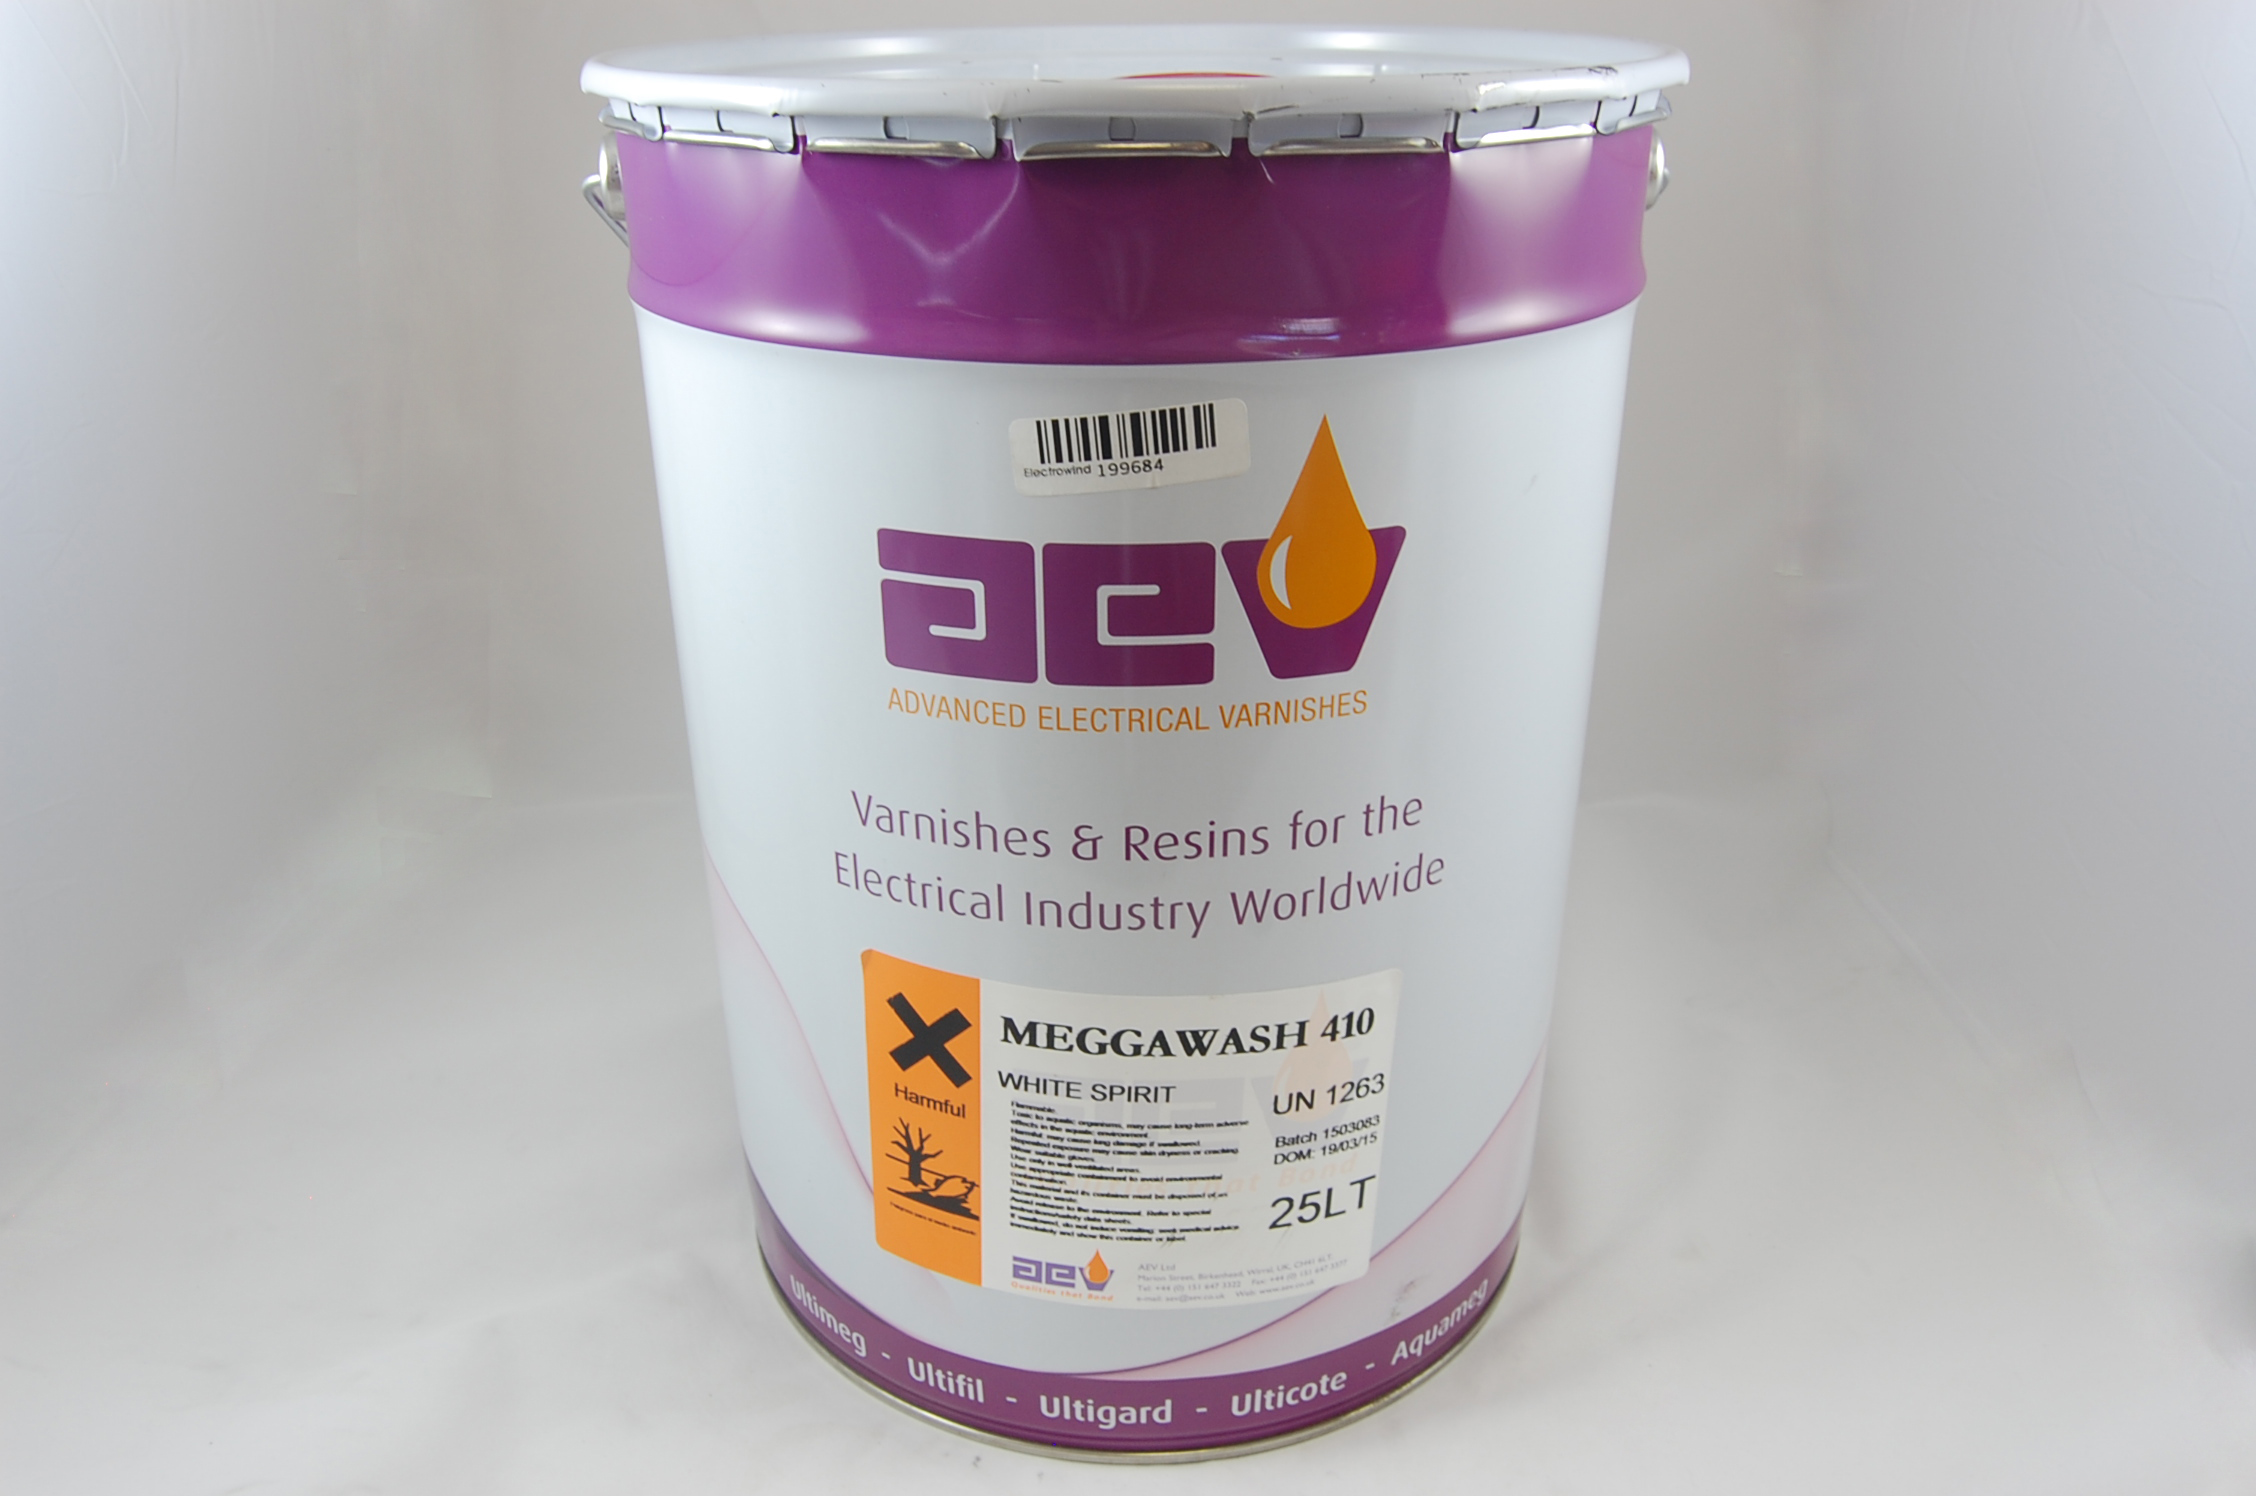 U372 Devolac Gray Fast-Coating Finishing Lacquer, gray, 5 LITRE can